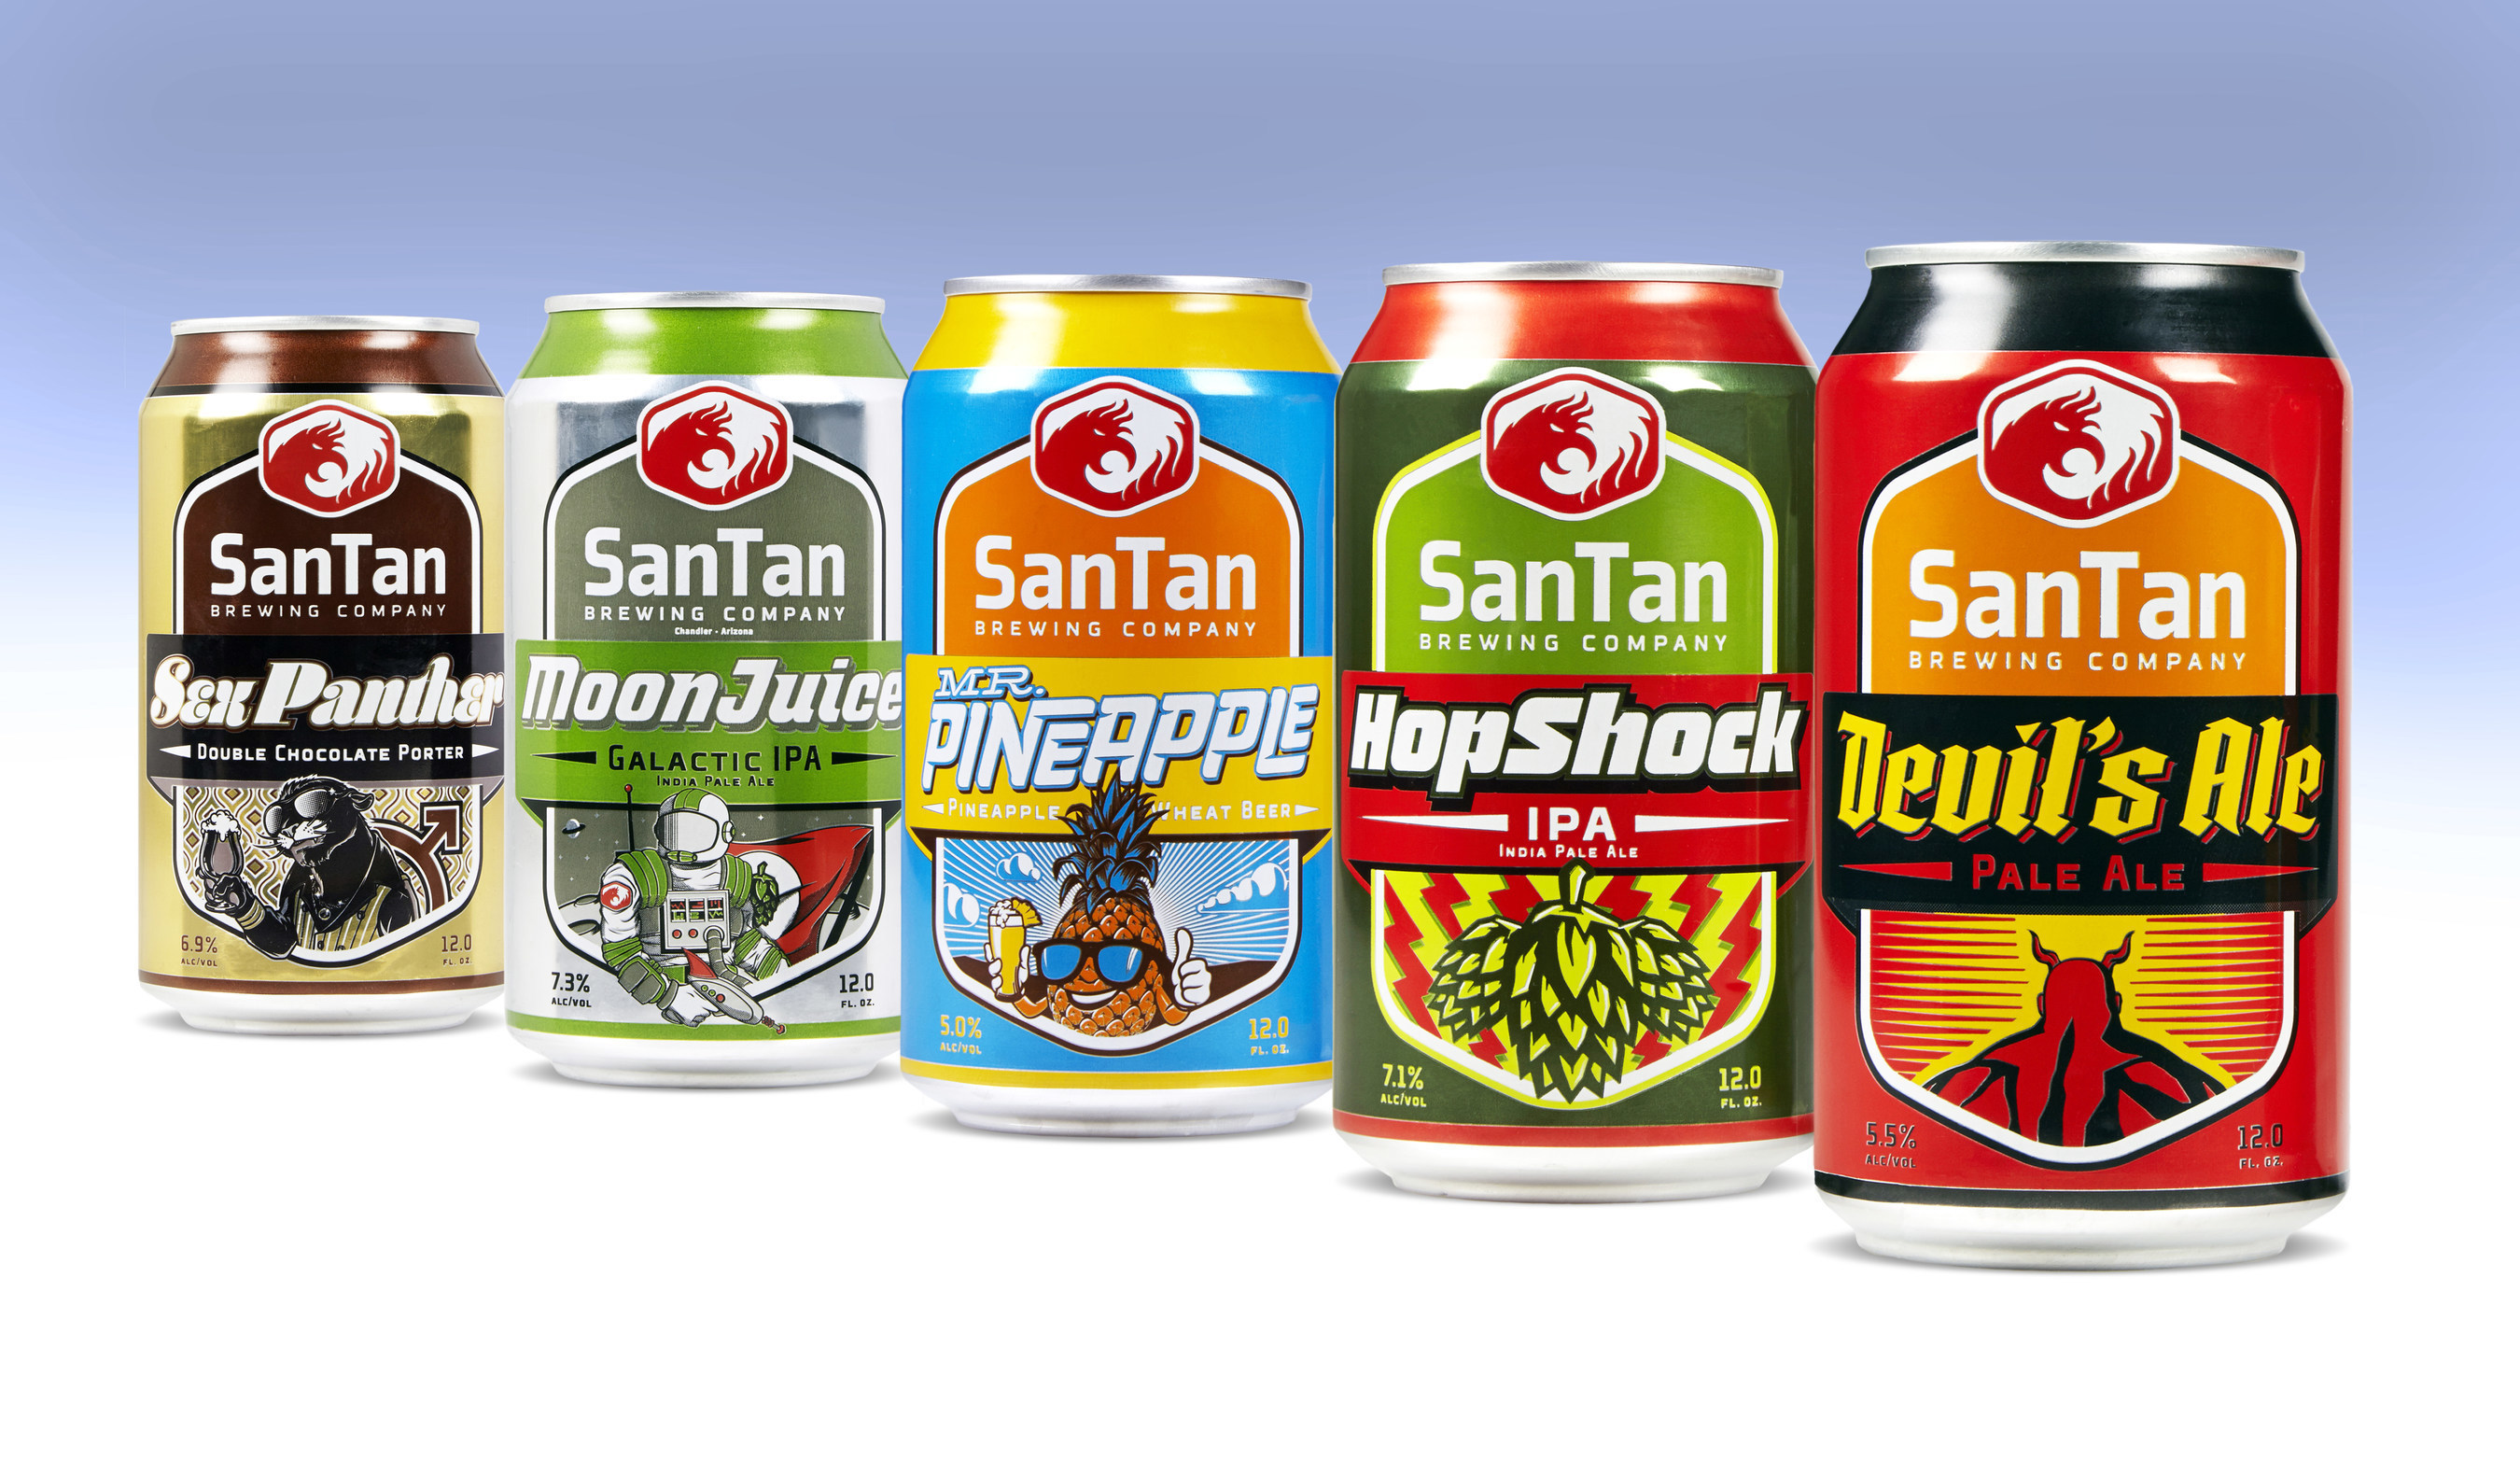 SanTan Brewing Company has unveiled an exciting new look for its family of craft beers in Rexam 12 oz. cans.